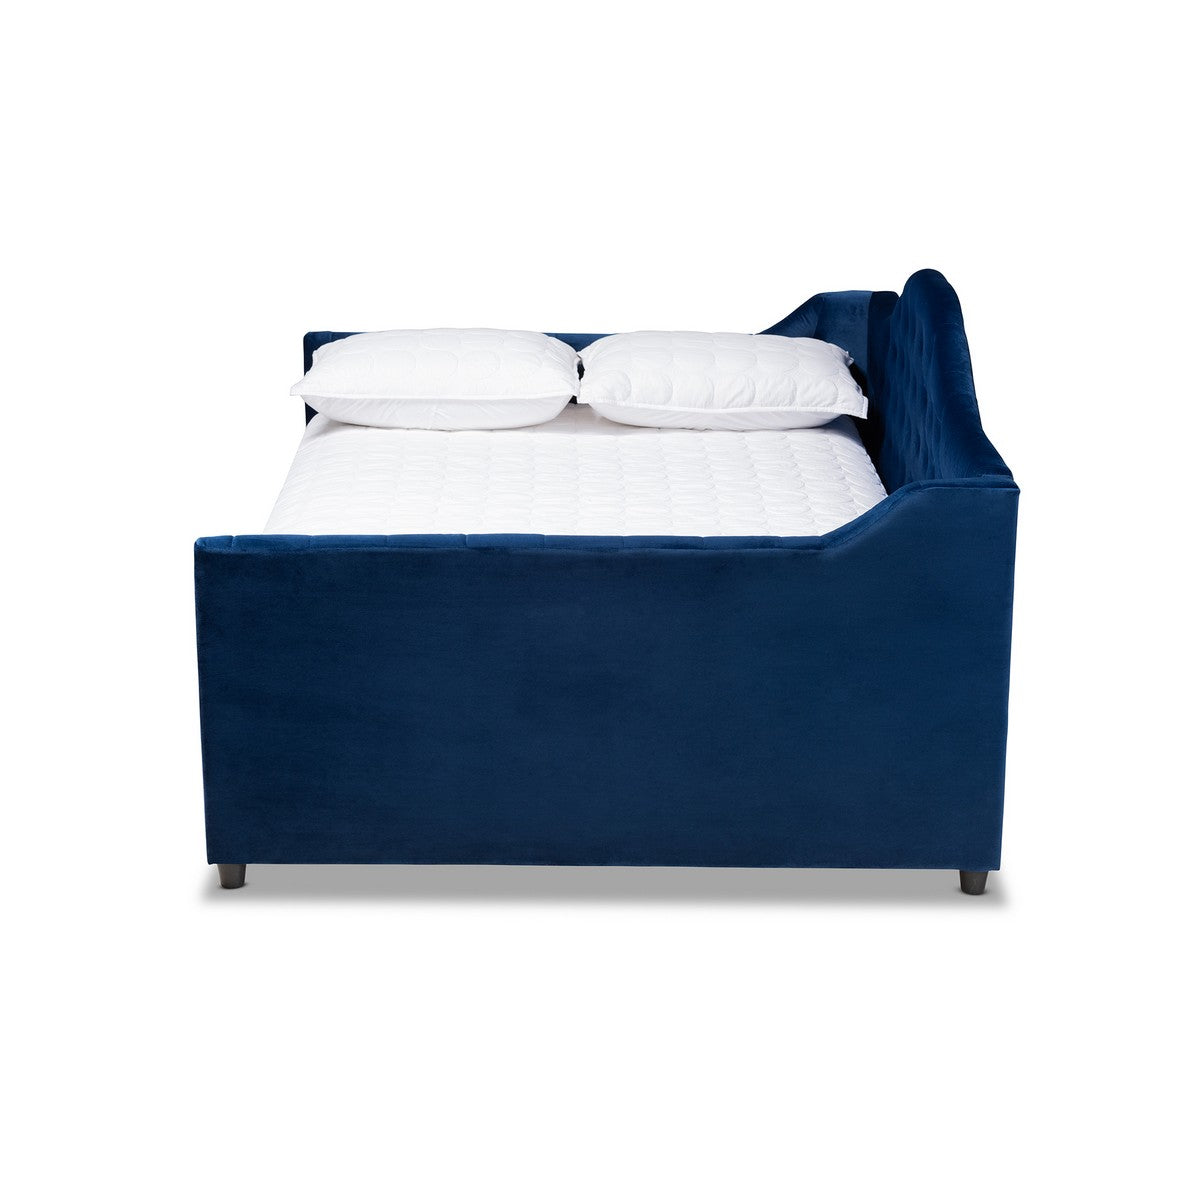 Baxton Studio Perry Modern and Contemporary Royal Blue Velvet Fabric Upholstered and Button Tufted Queen Size Daybed with Trundle